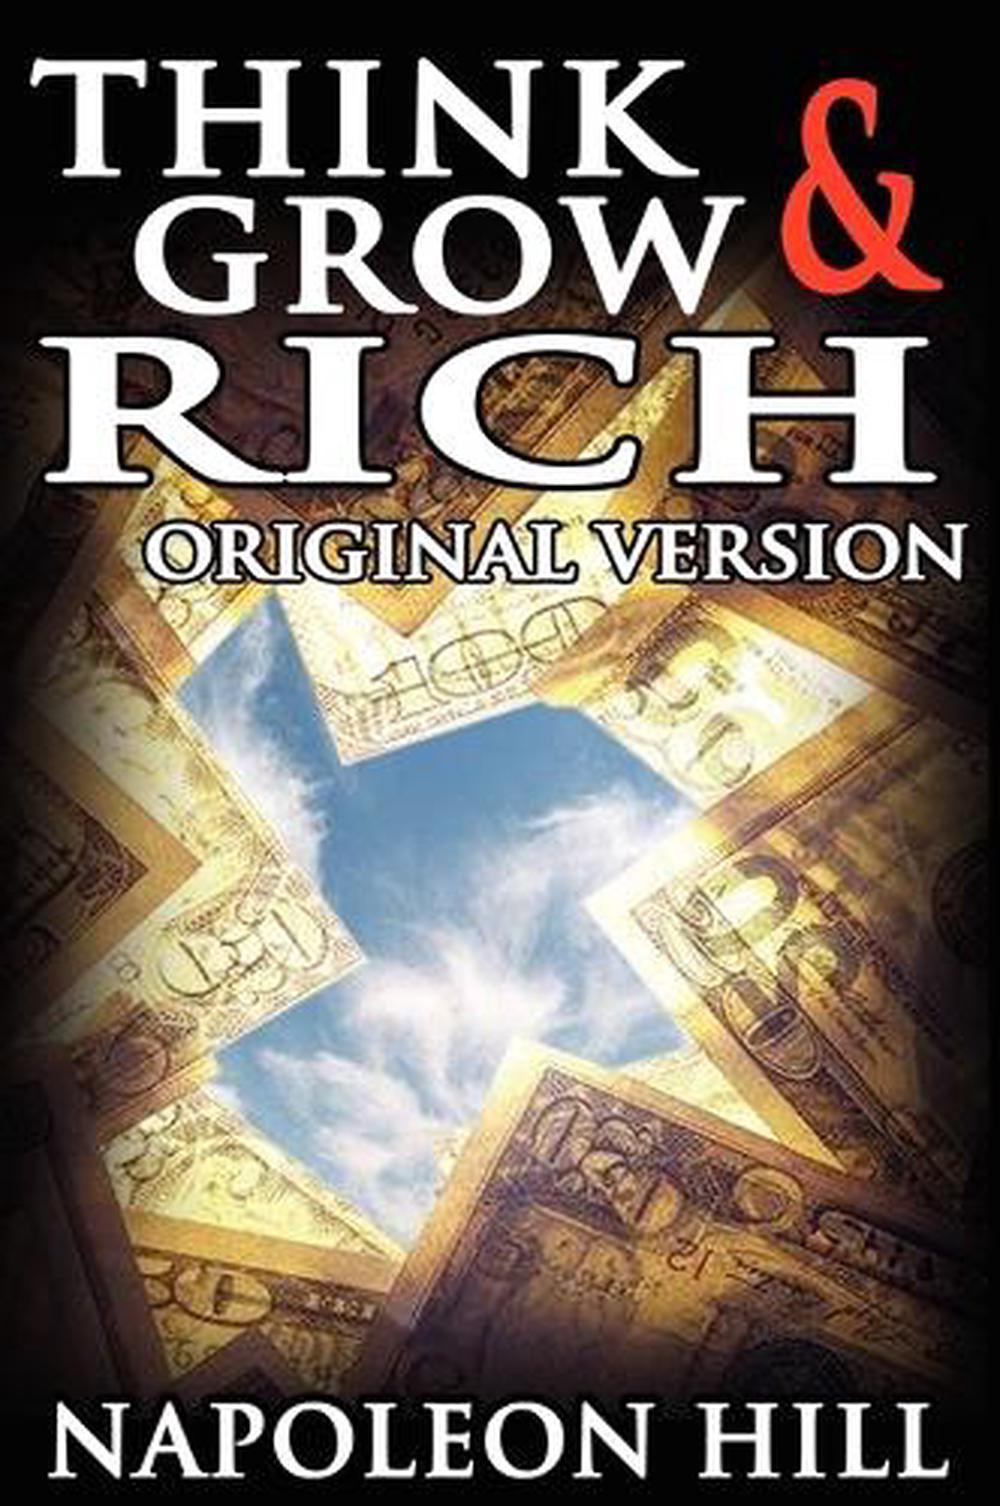 napoleon hill think and grow rich audio book